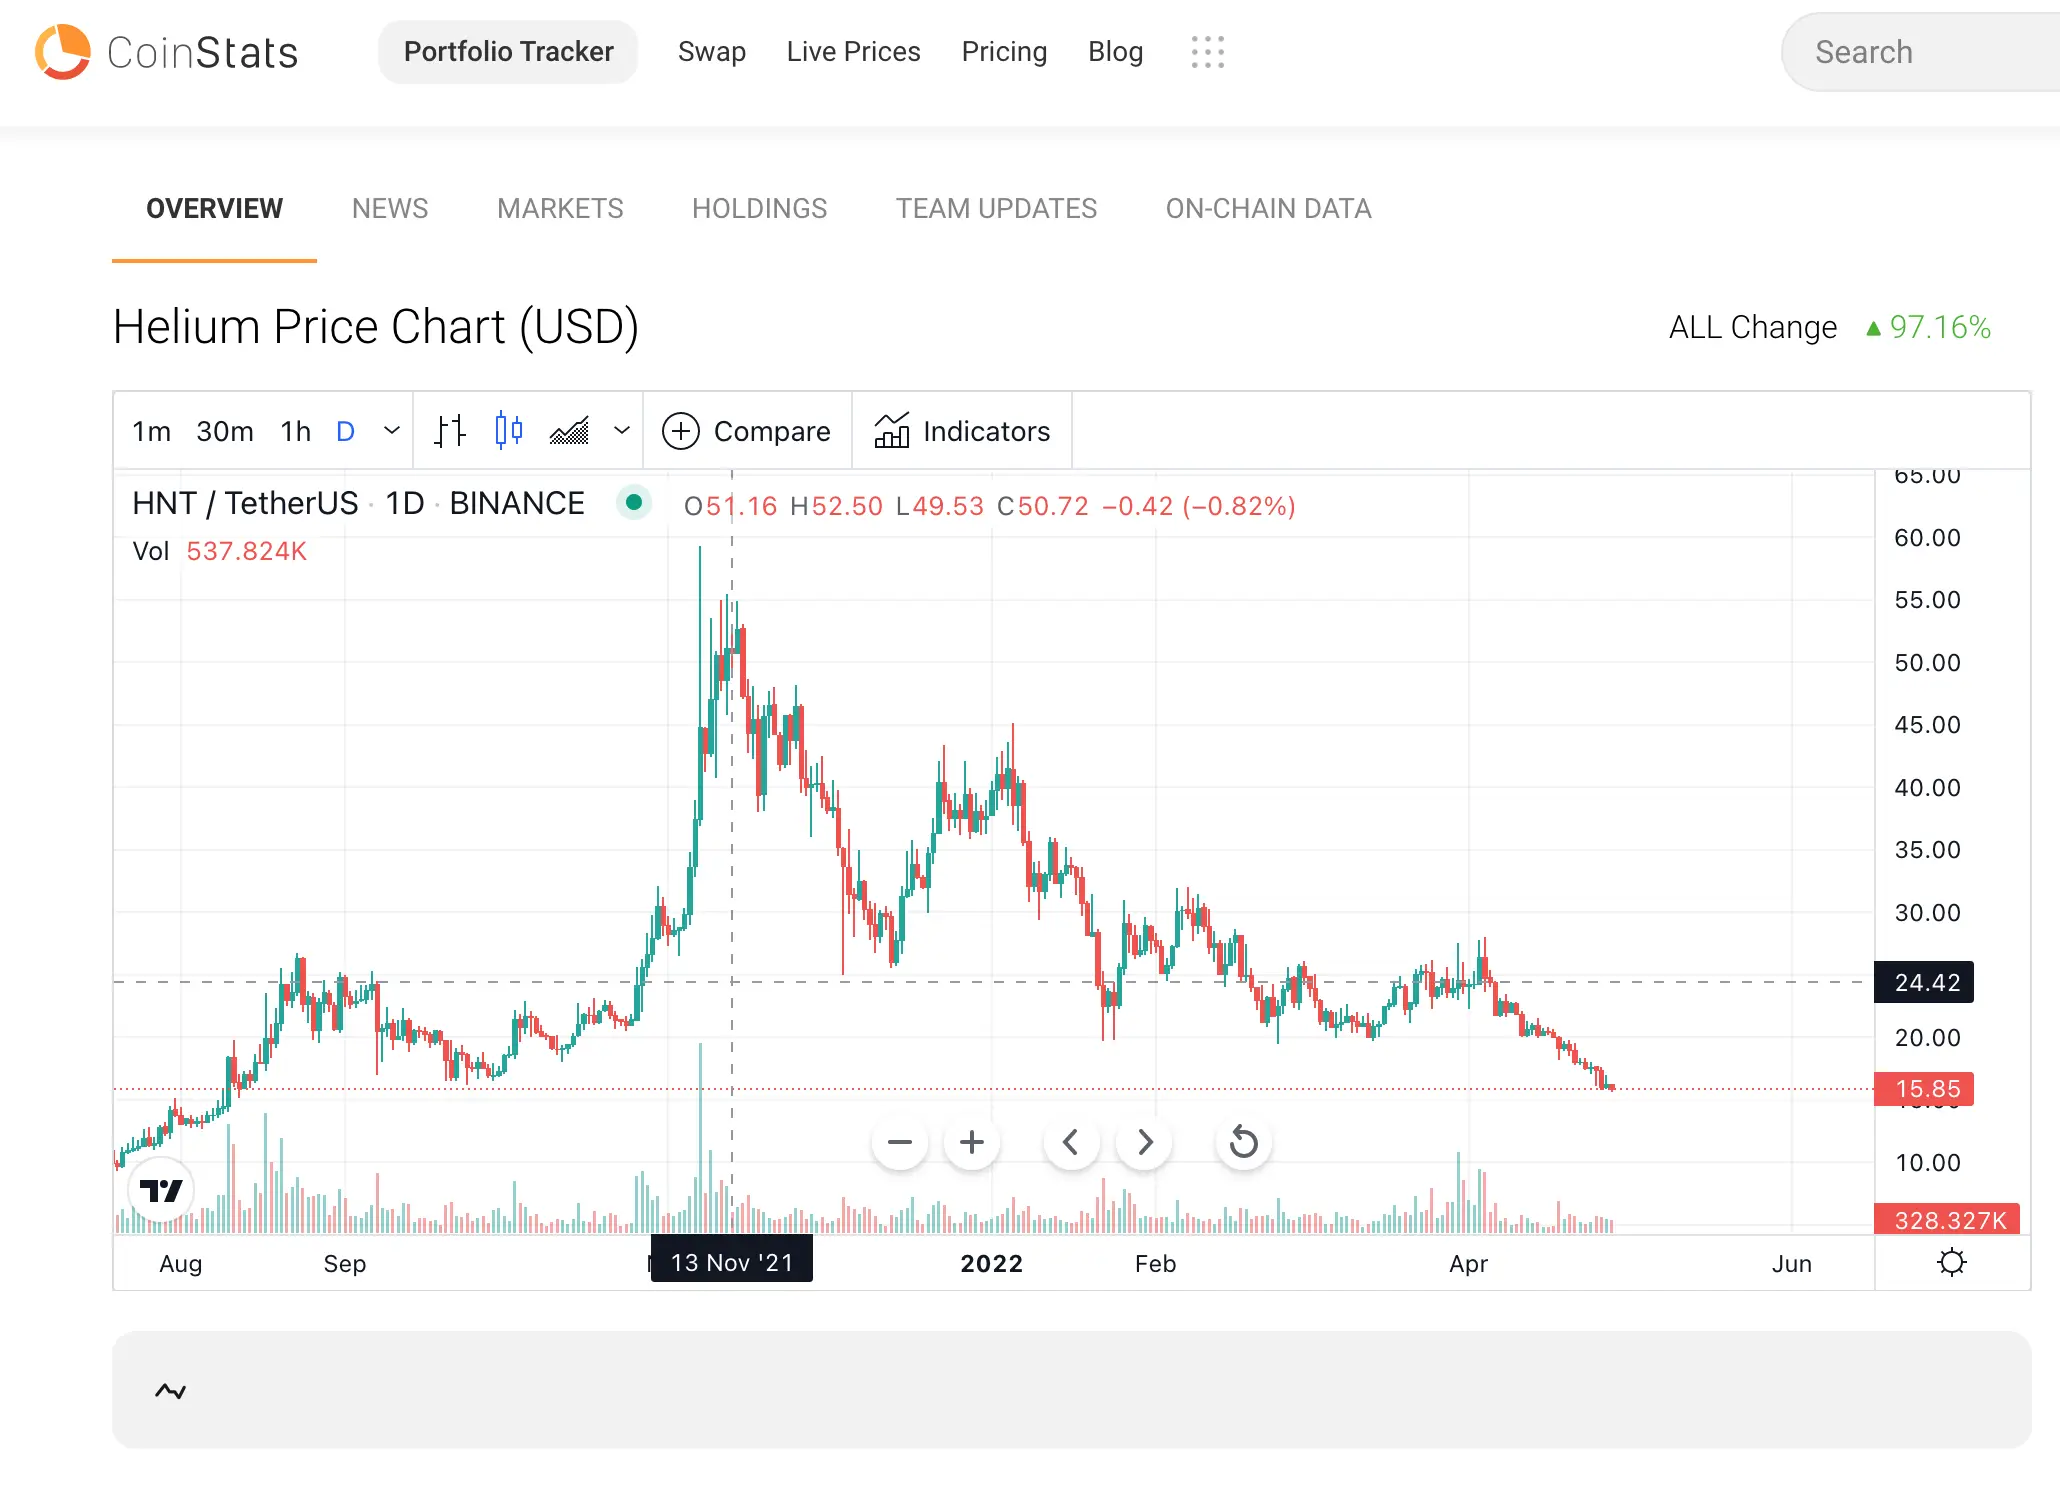 Helium trading view on CoinStats